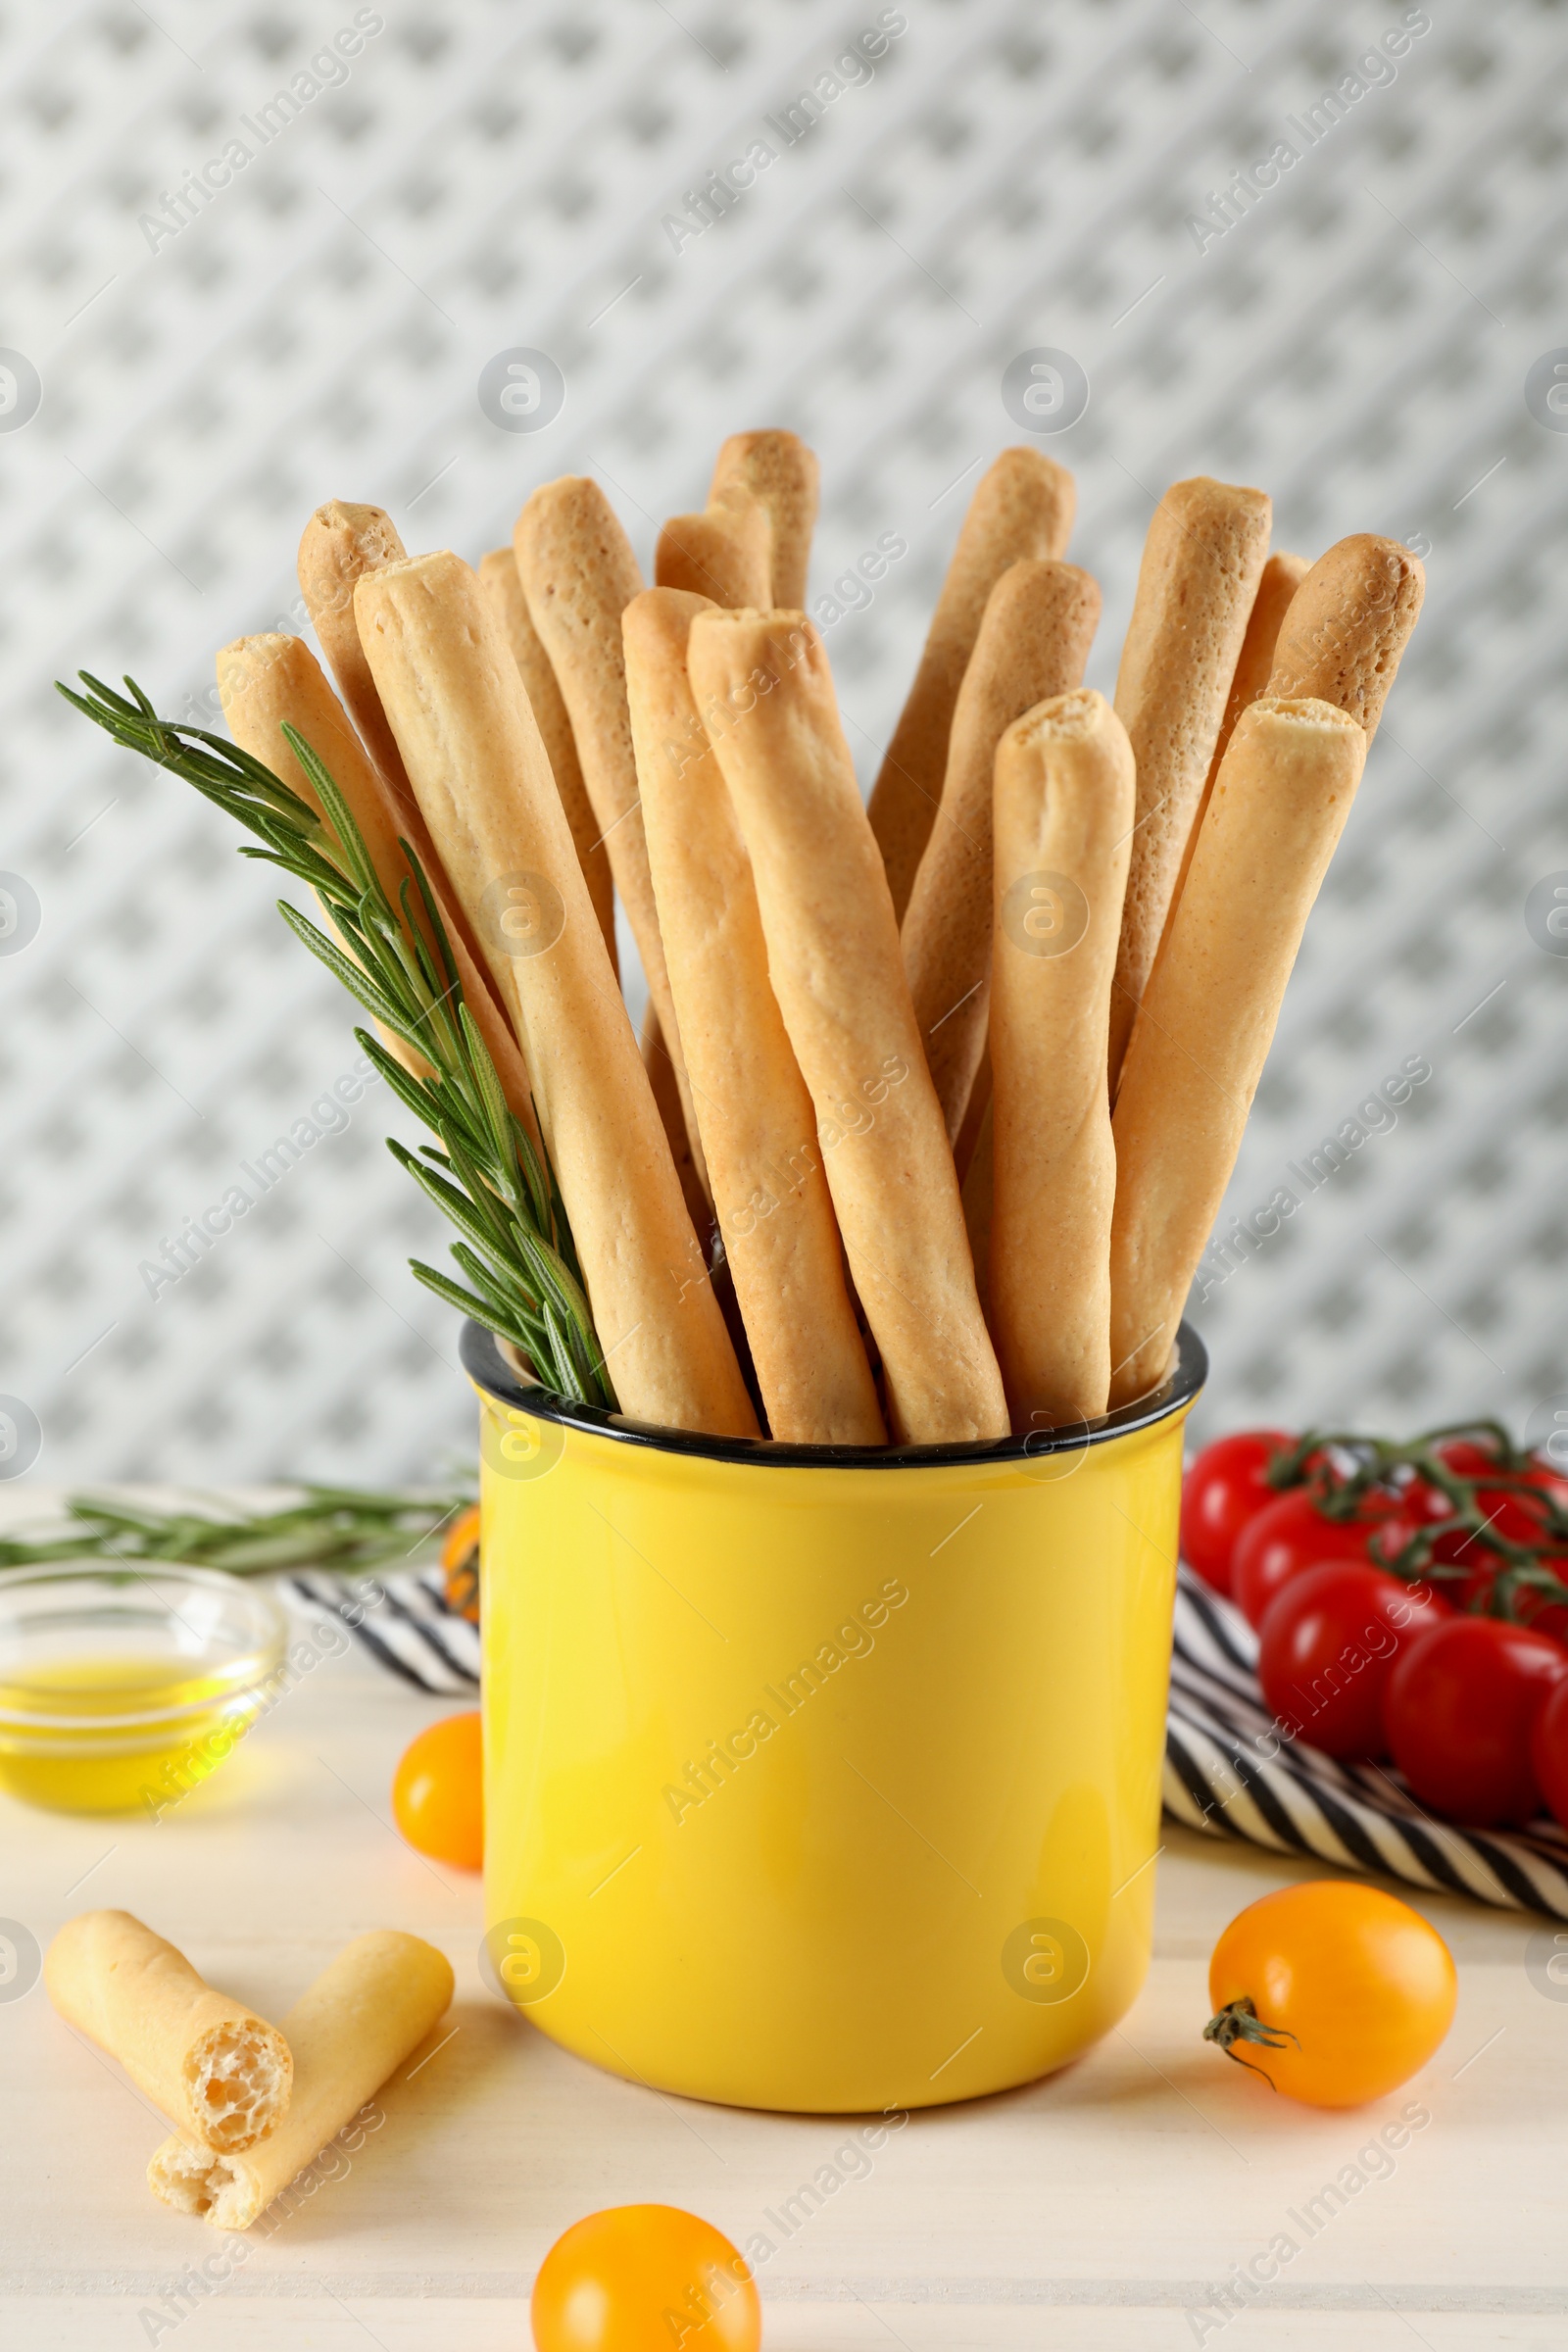 Photo of Delicious grissini sticks, rosemary and tomatoes on white wooden table